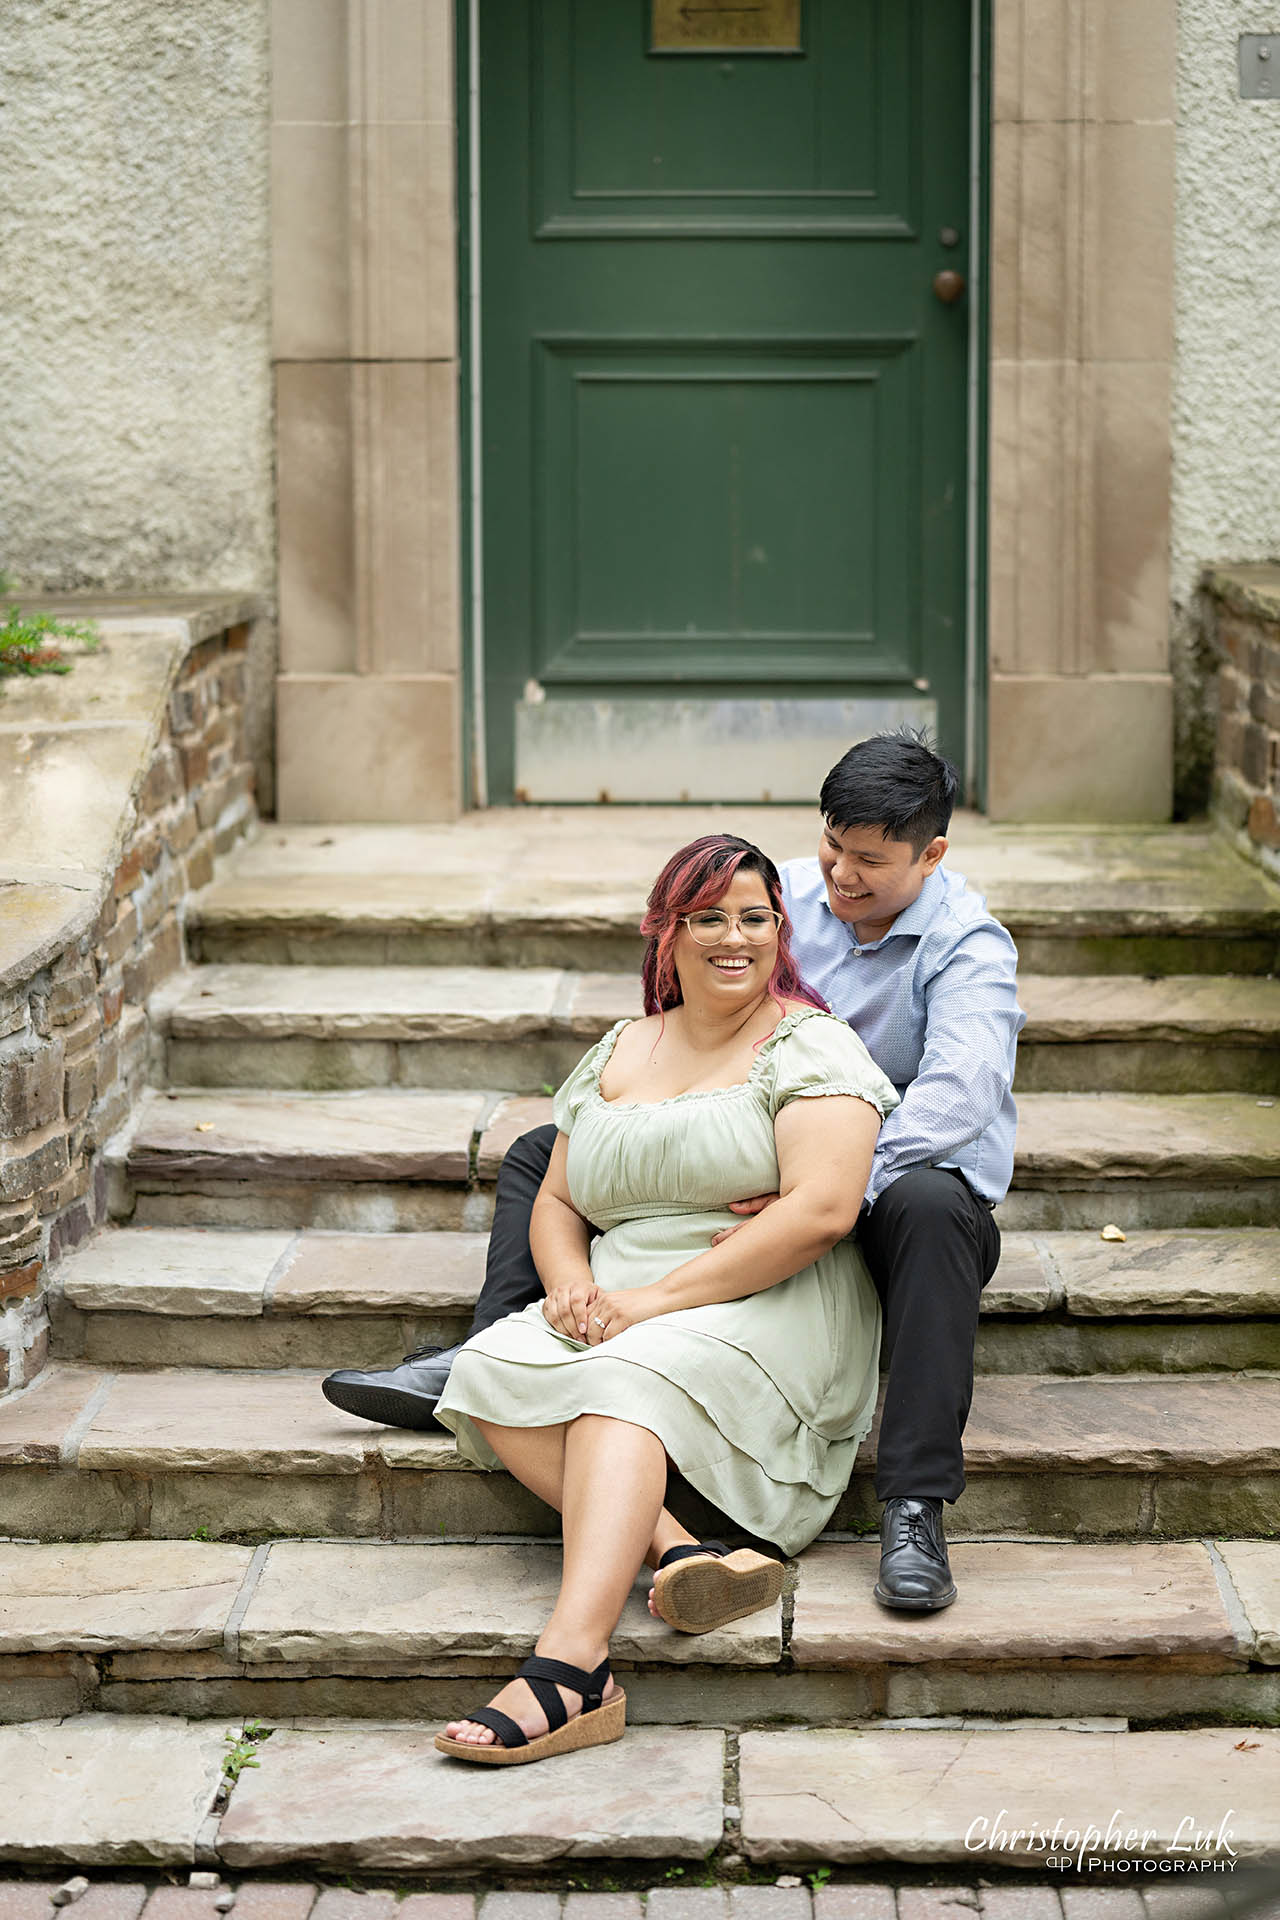 Adamson Estate Exterior Entrance Stairs Bride Sitting Together Hug Candid Organic Natural Photojournalistic Portrait